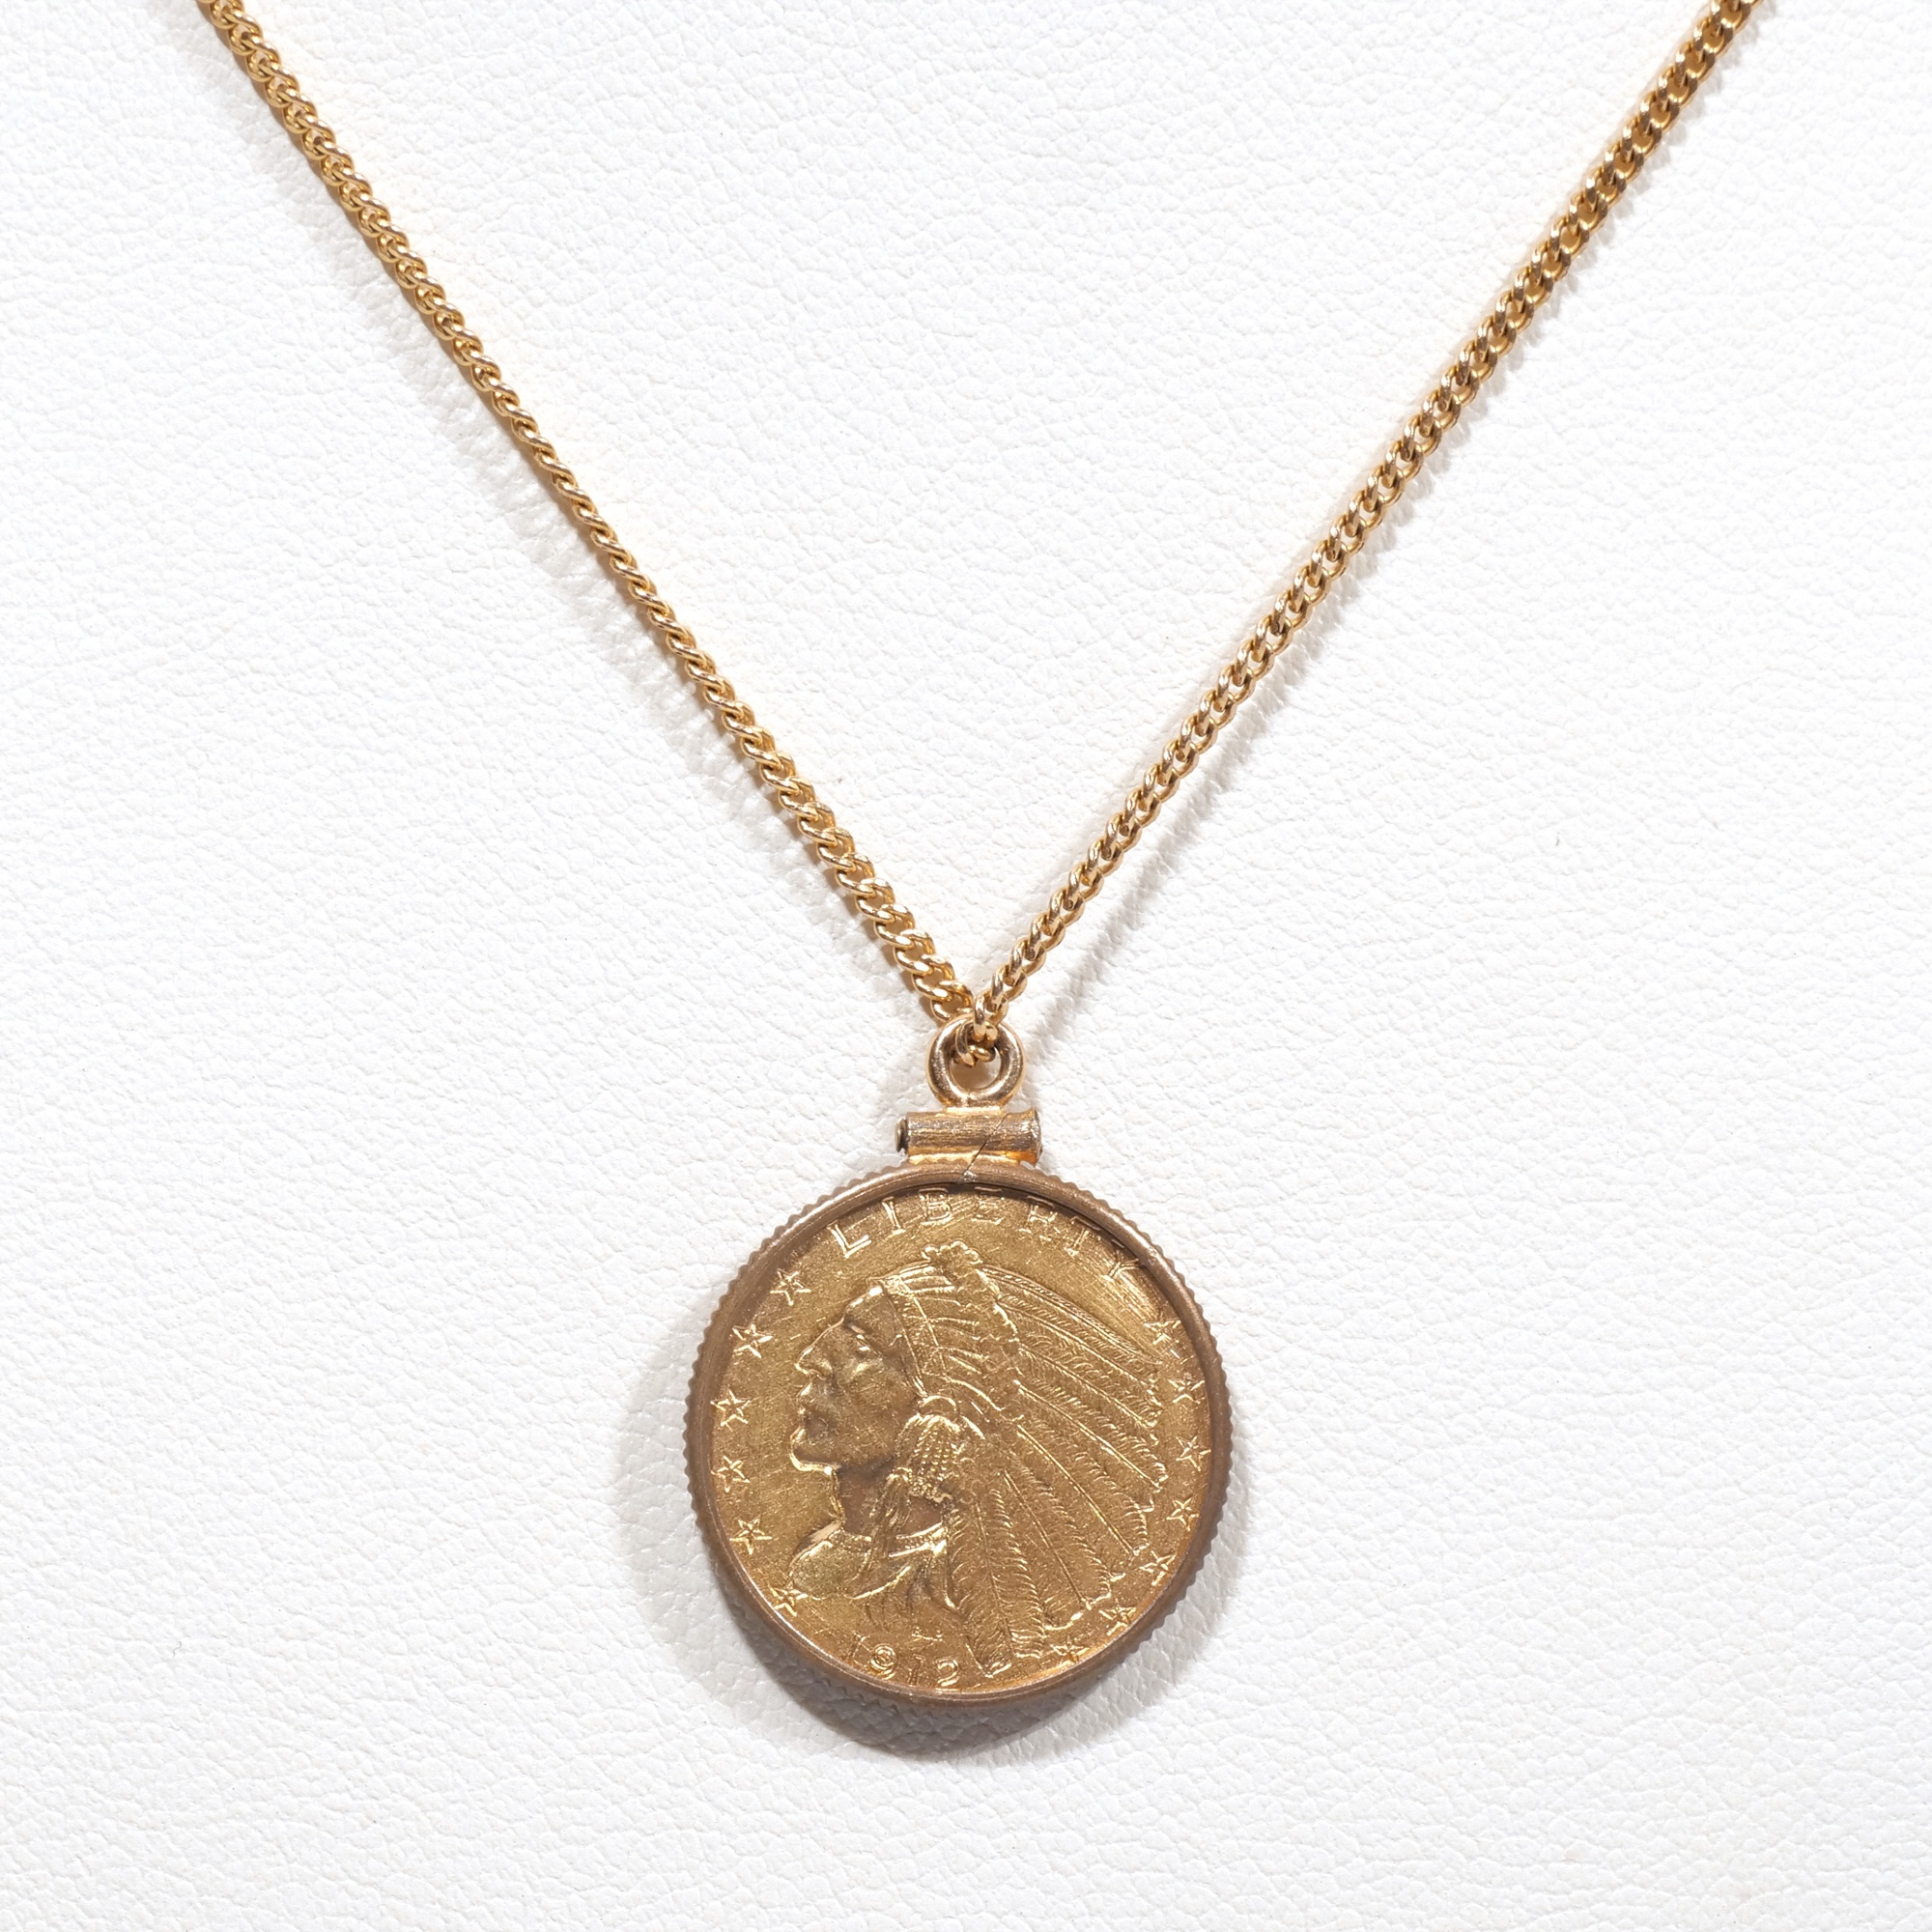 1912 $2.5 INDIAN HEAD GOLD COIN PENDANT NECKLACE